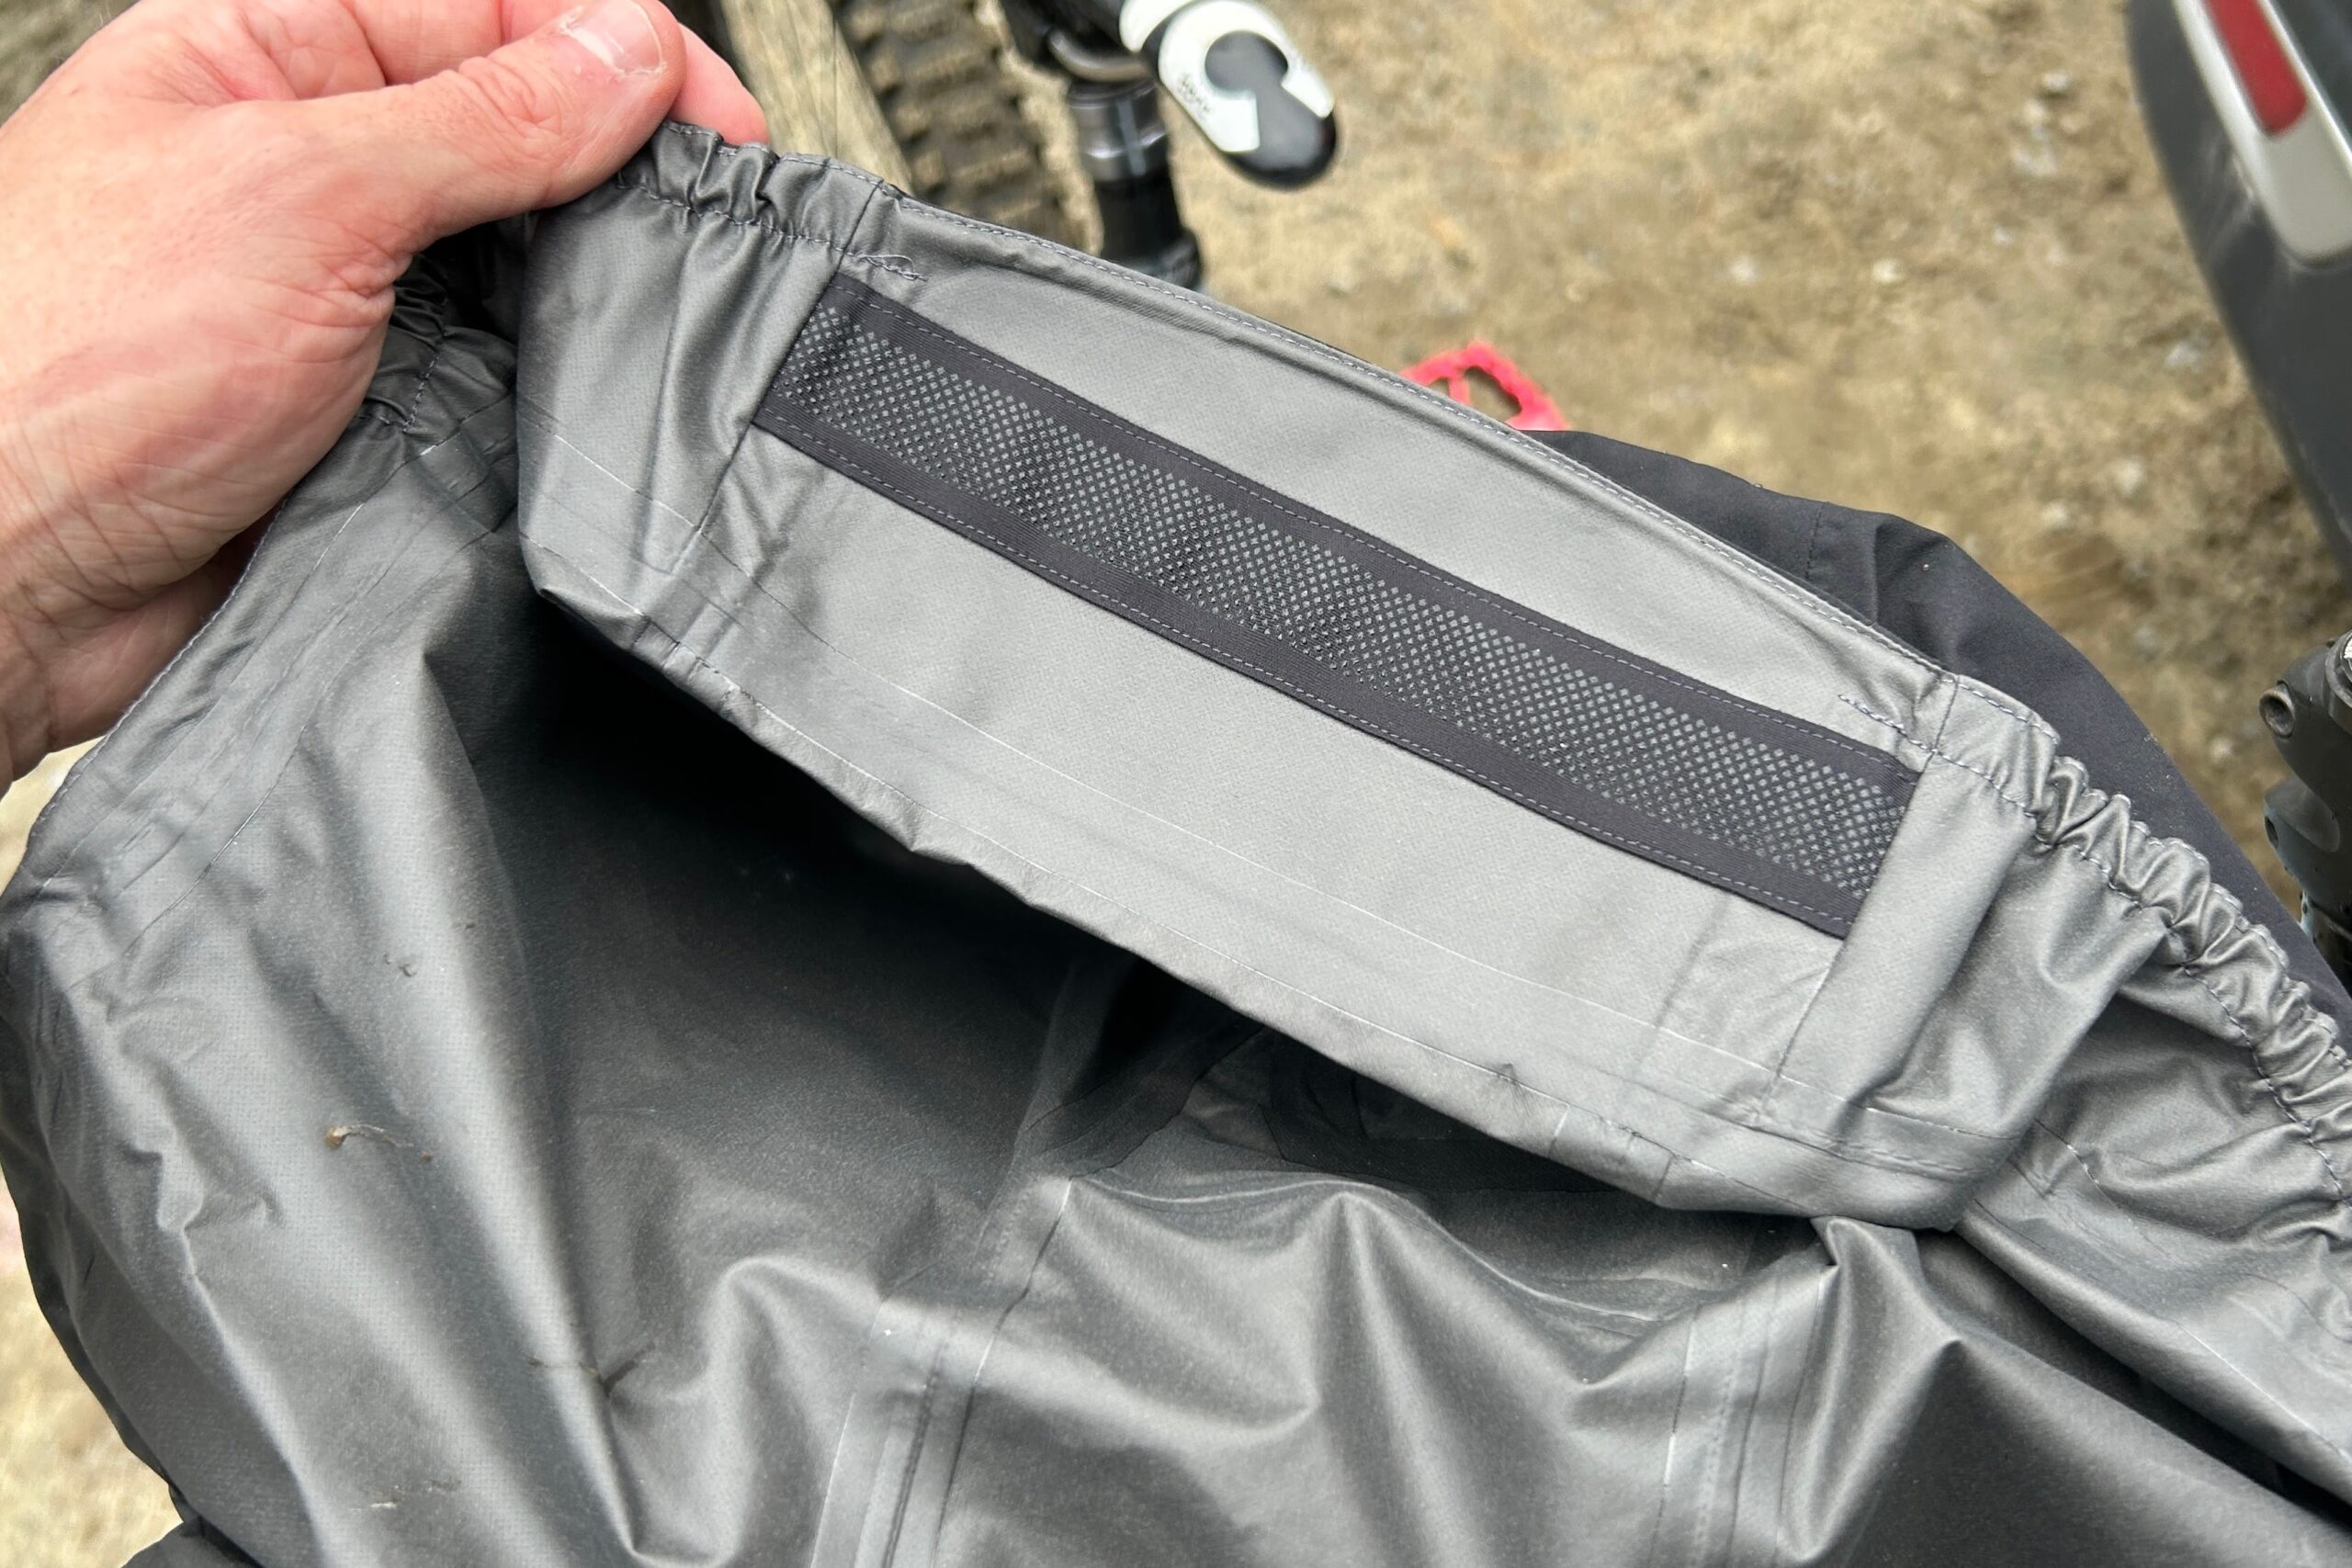 The inside of the hood of the Gorewear Endure jacket showing the Gore-Tex PACLITE materials and taped seams